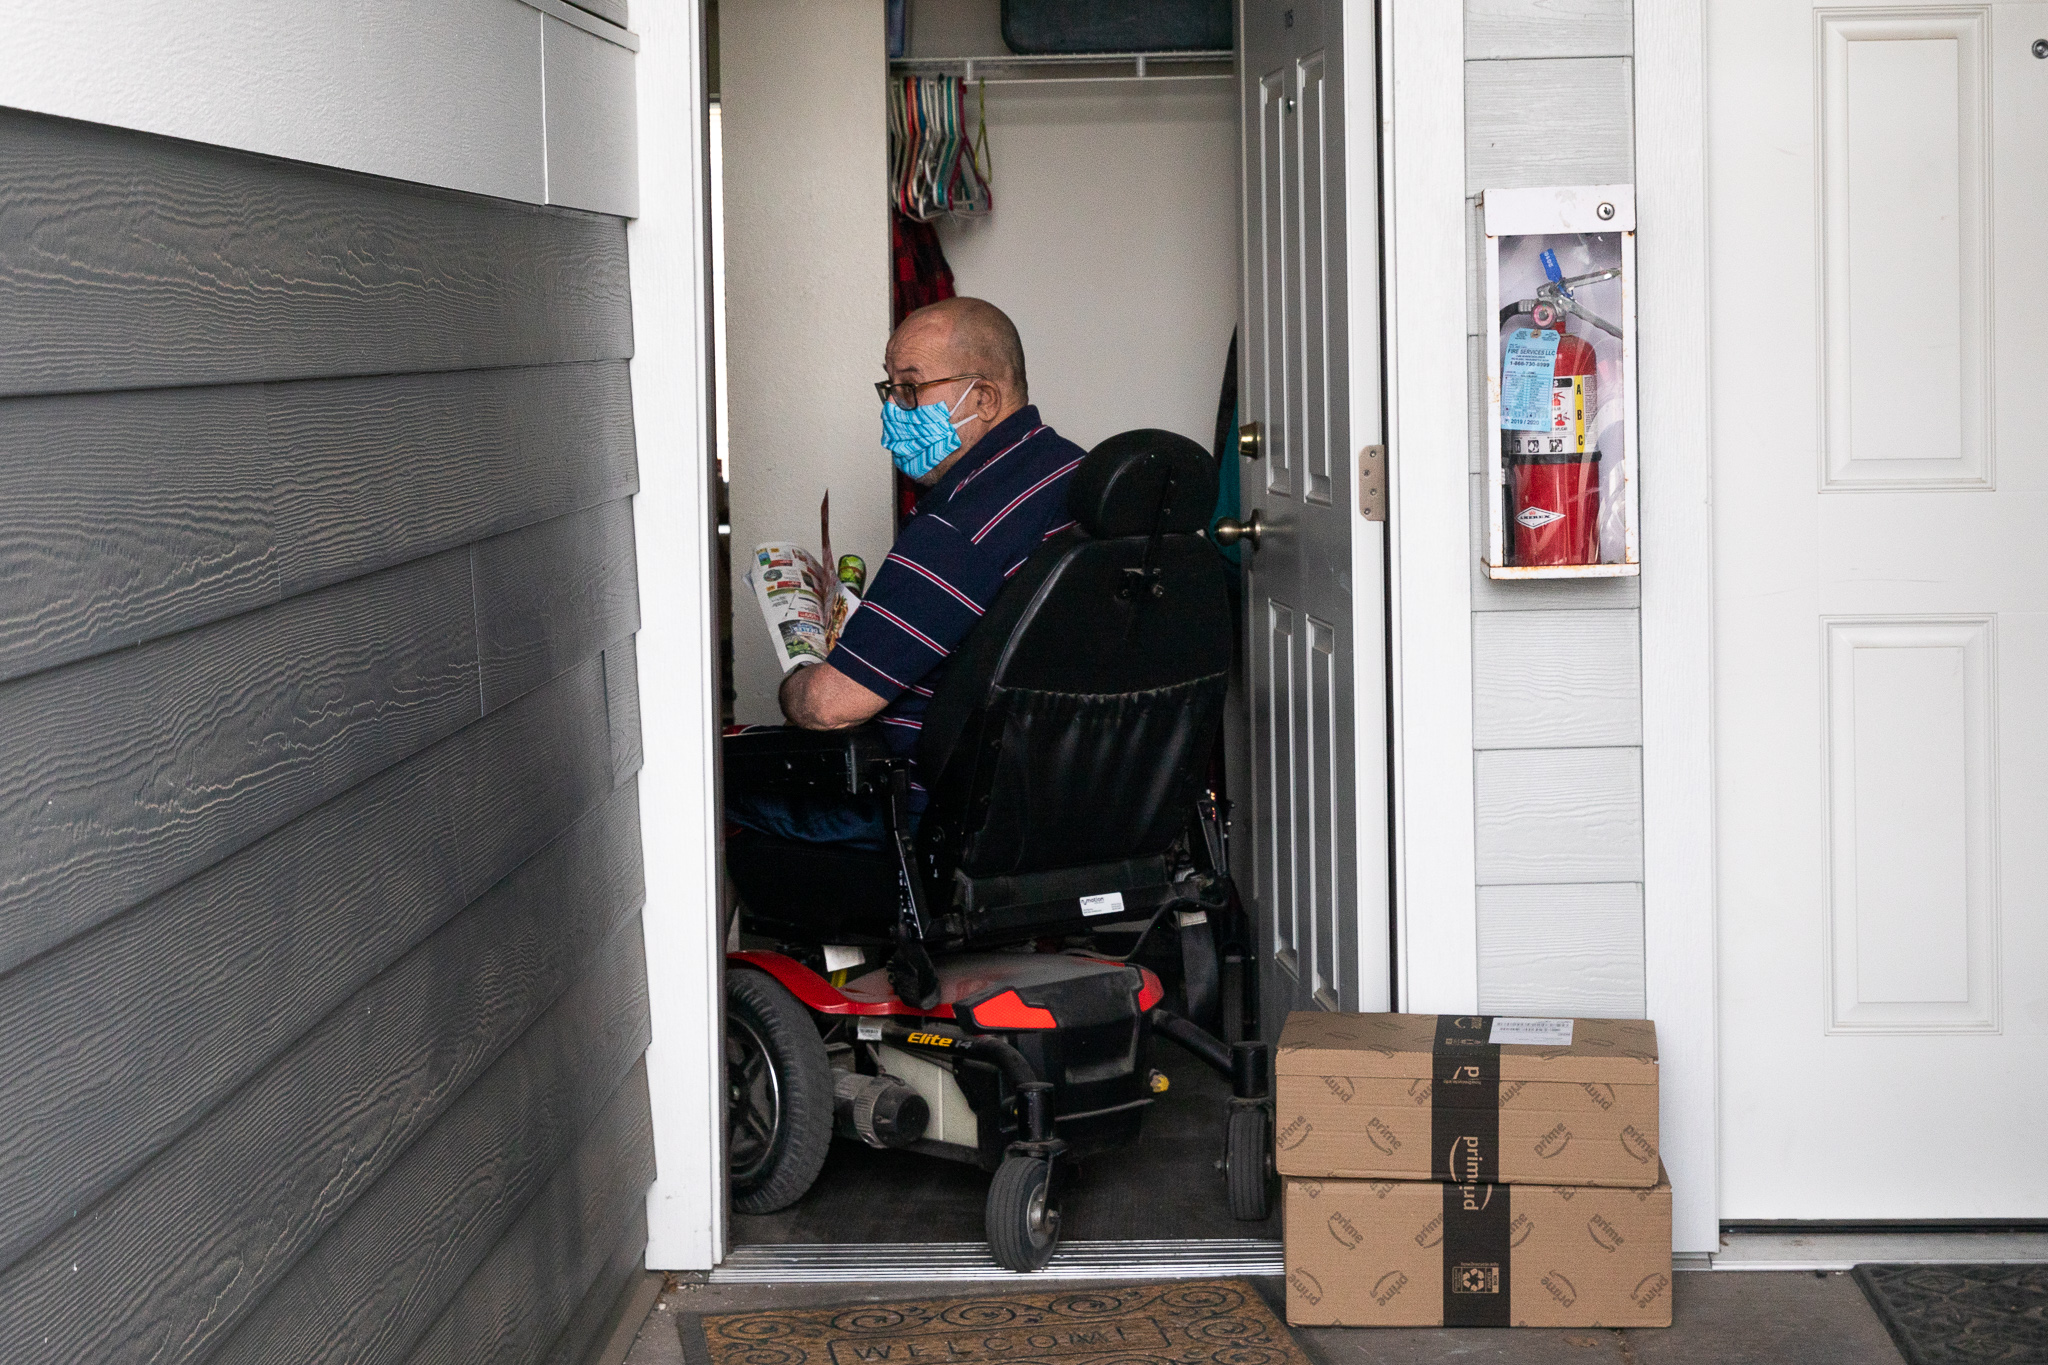 Scott sits in his wheelchair, framed by his front door